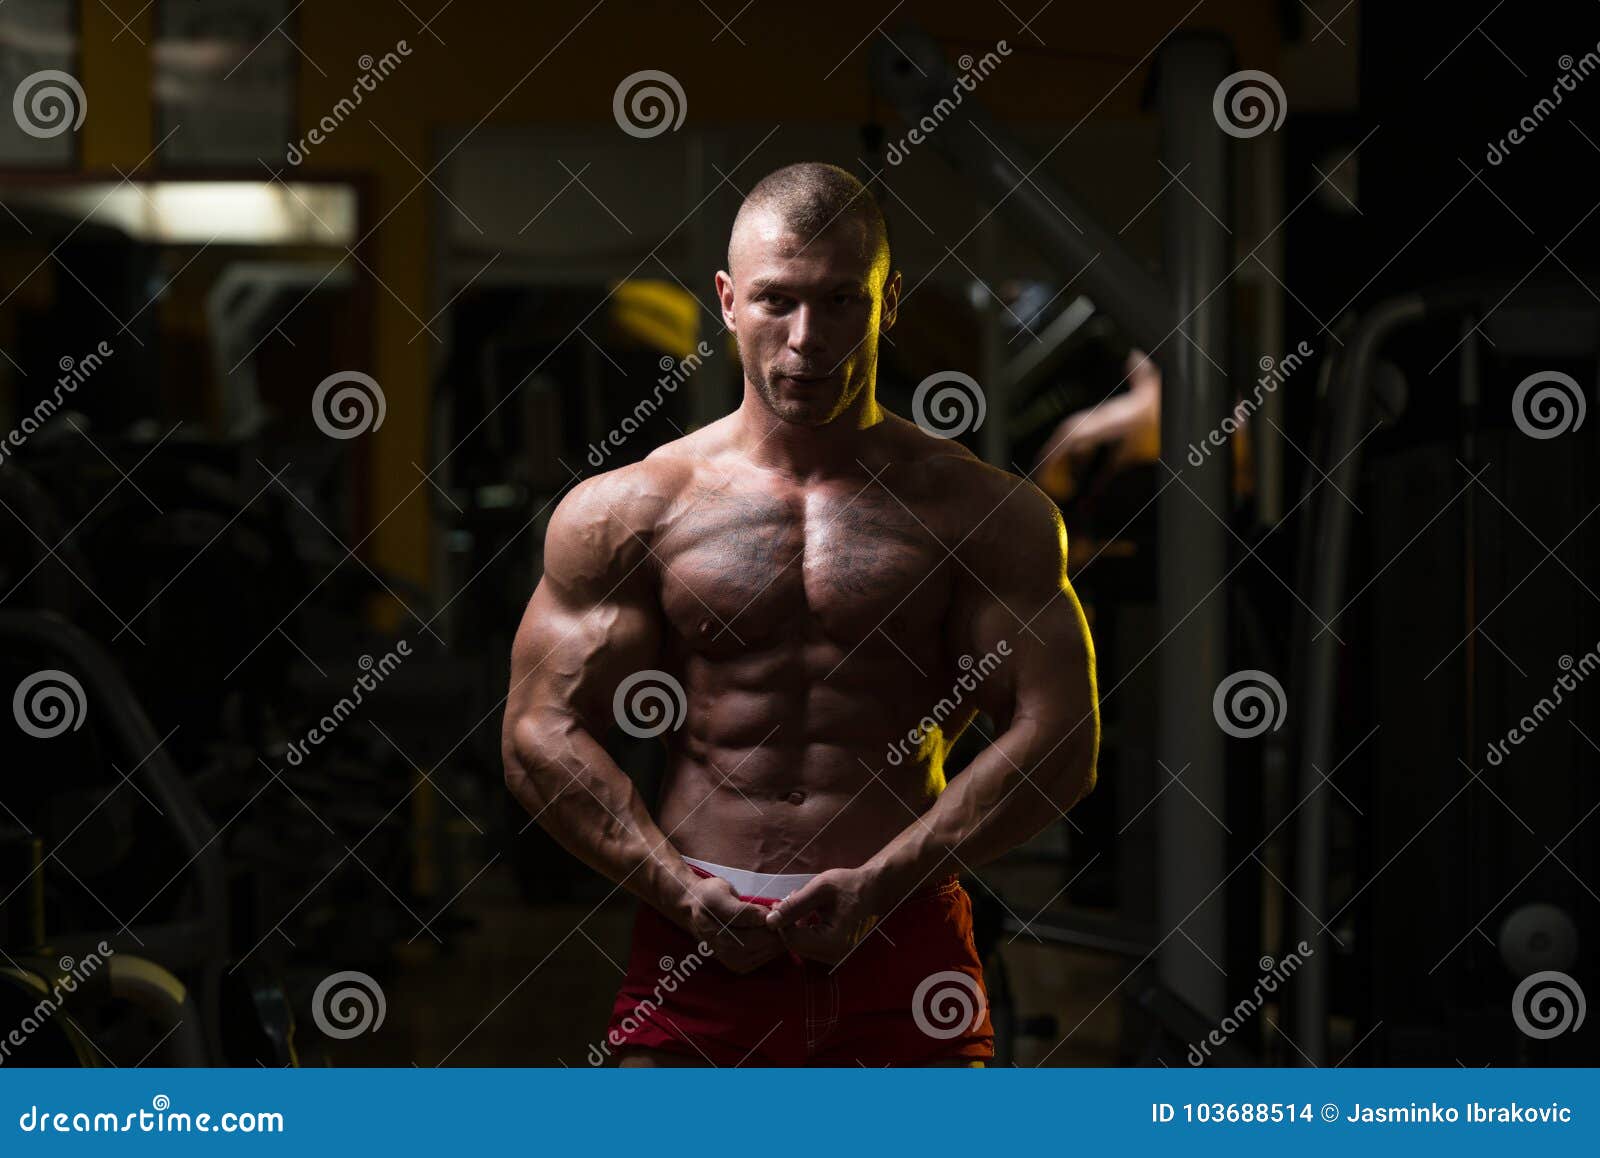 Serious Bodybuilder Standing in the Gym Stock Photo - Image of brown ...